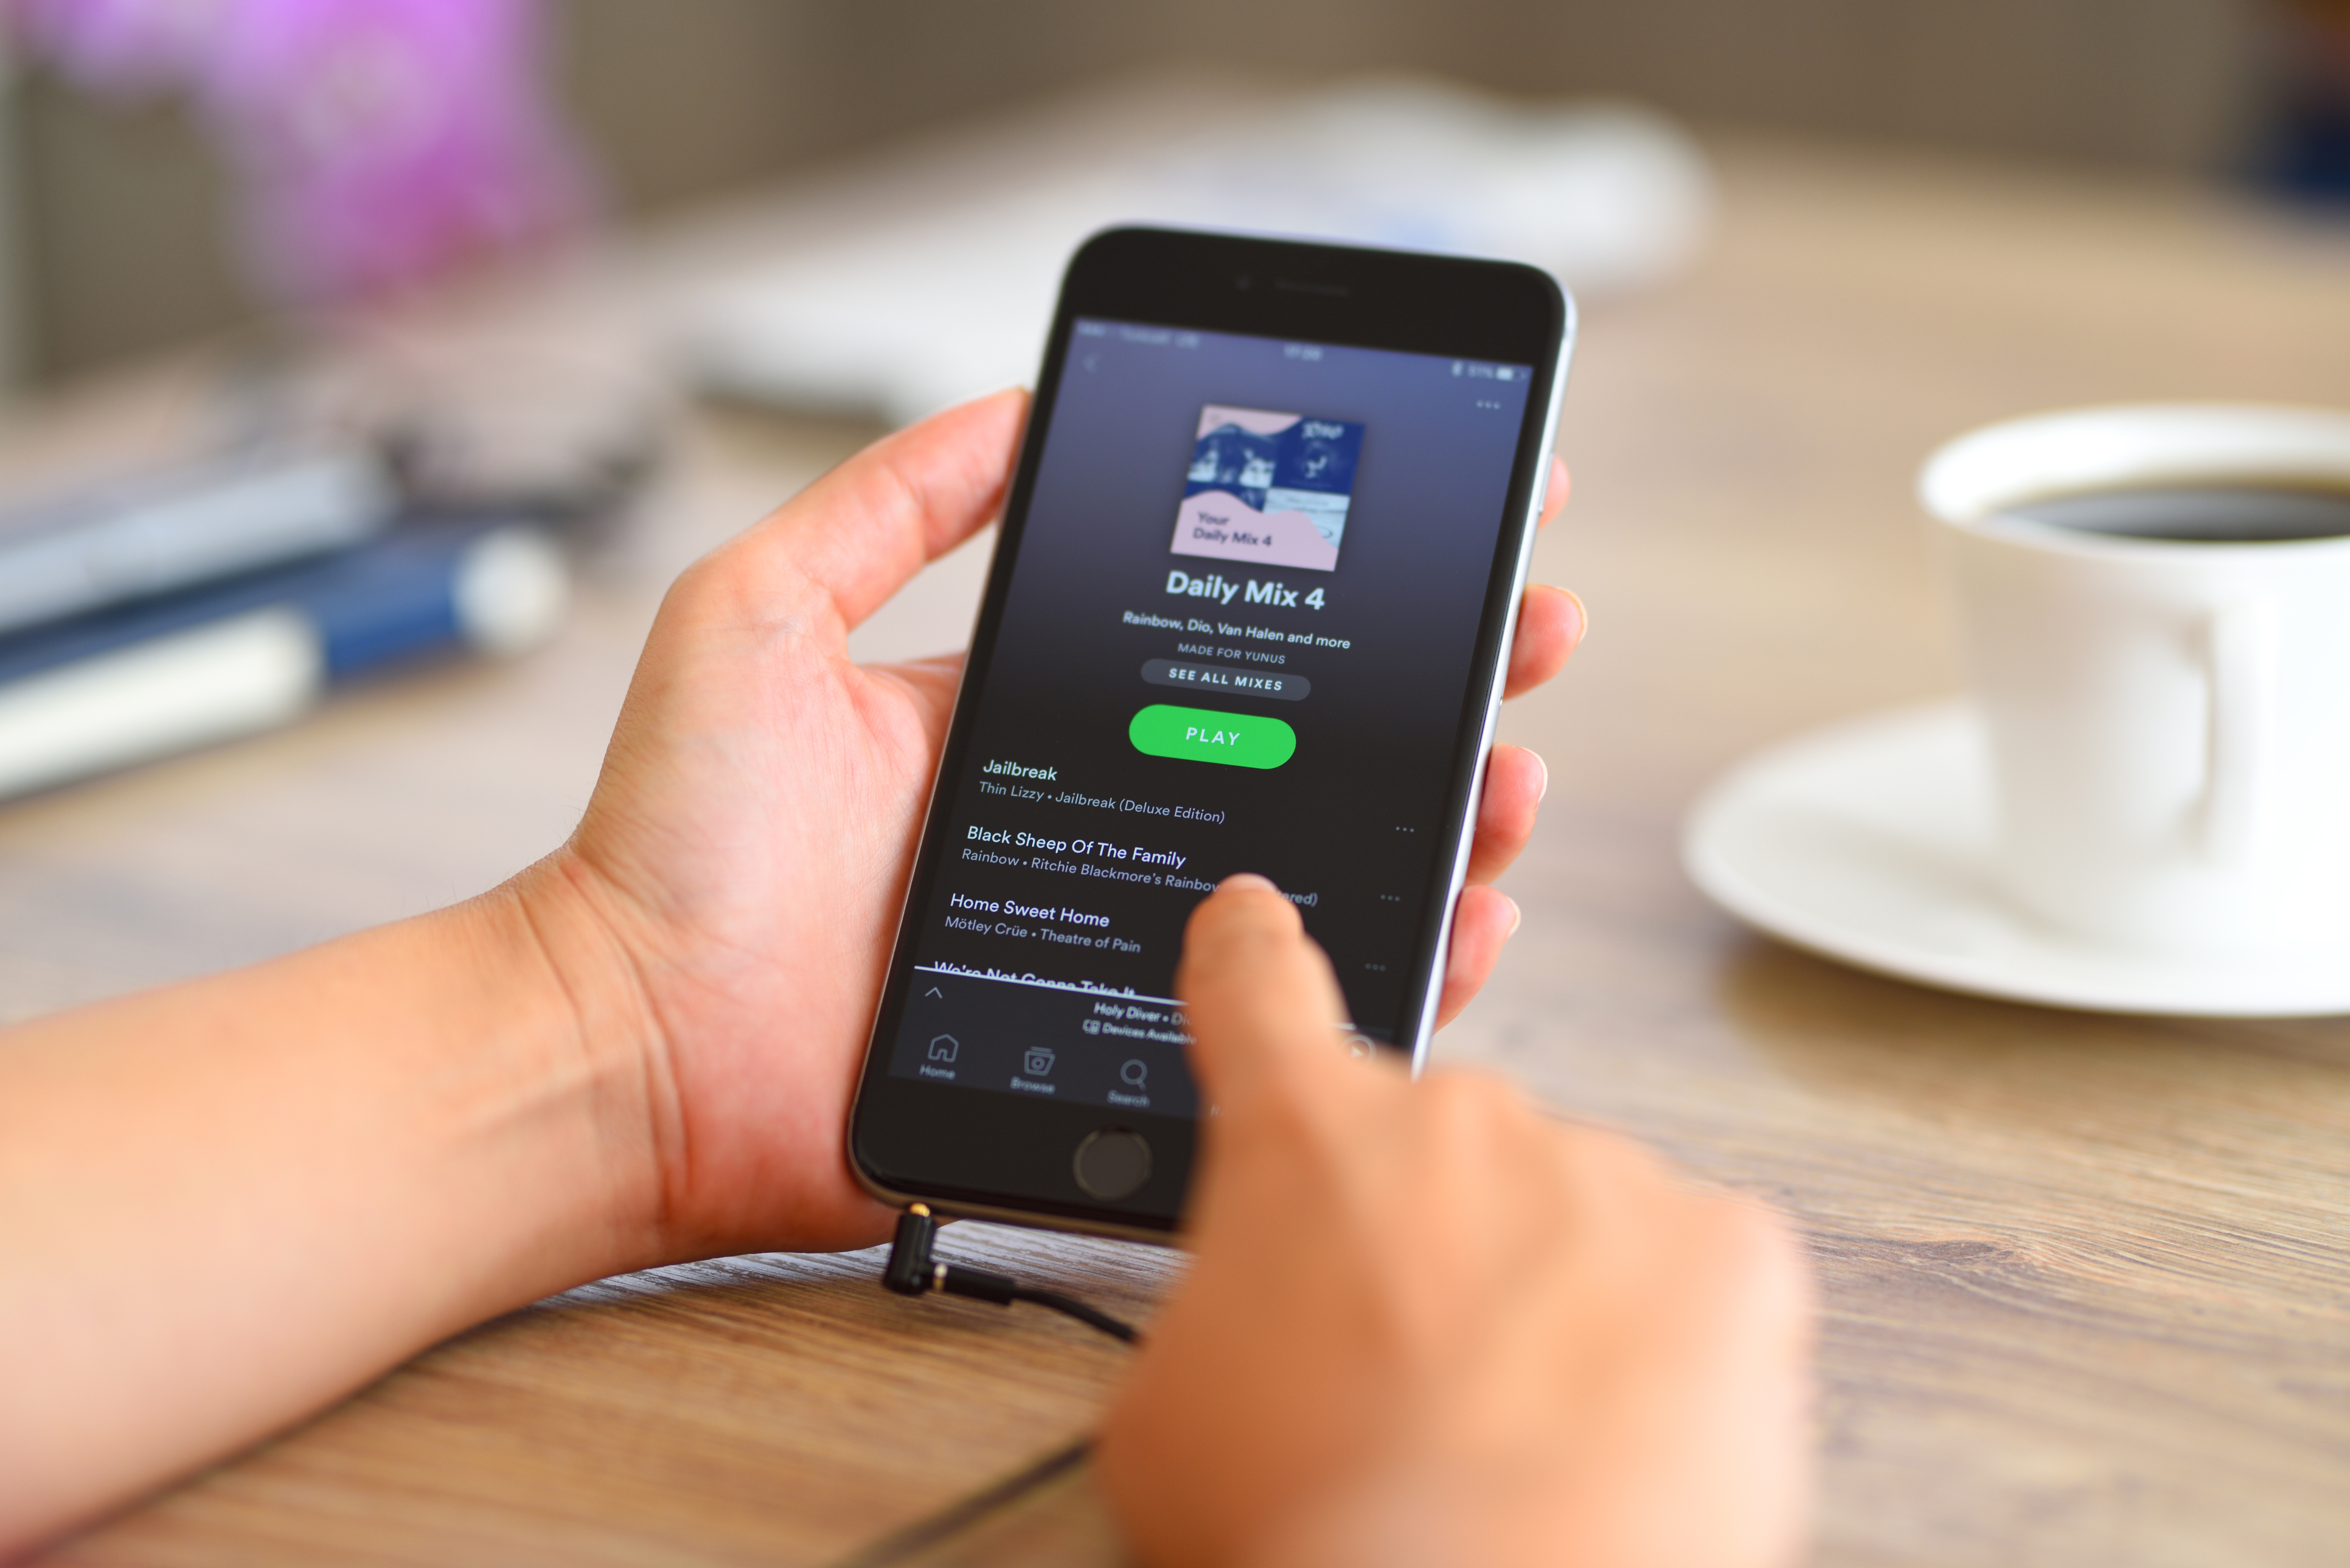 Spotify on iPhone 6